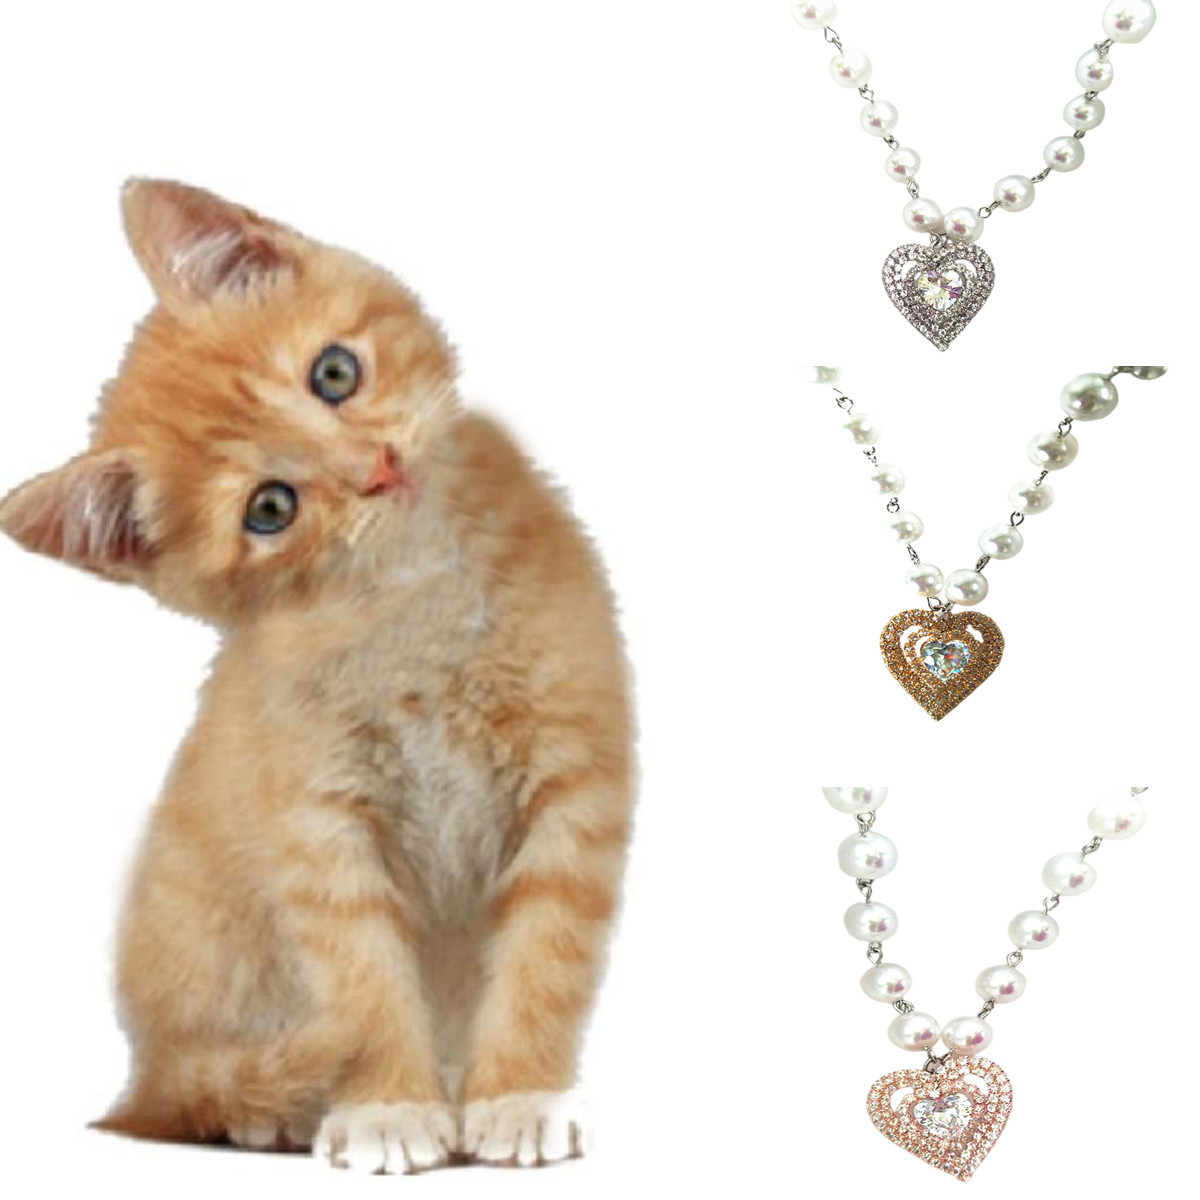 Pet Enjoy Dog Cat Pearl Necklace with Love Heart Pendant,Dog Cat Fancy Princess Style Shiny Faux Pearl Collar,Cute Necklace Jewelry for Small Pets Cats Puppy - image 1 of 8